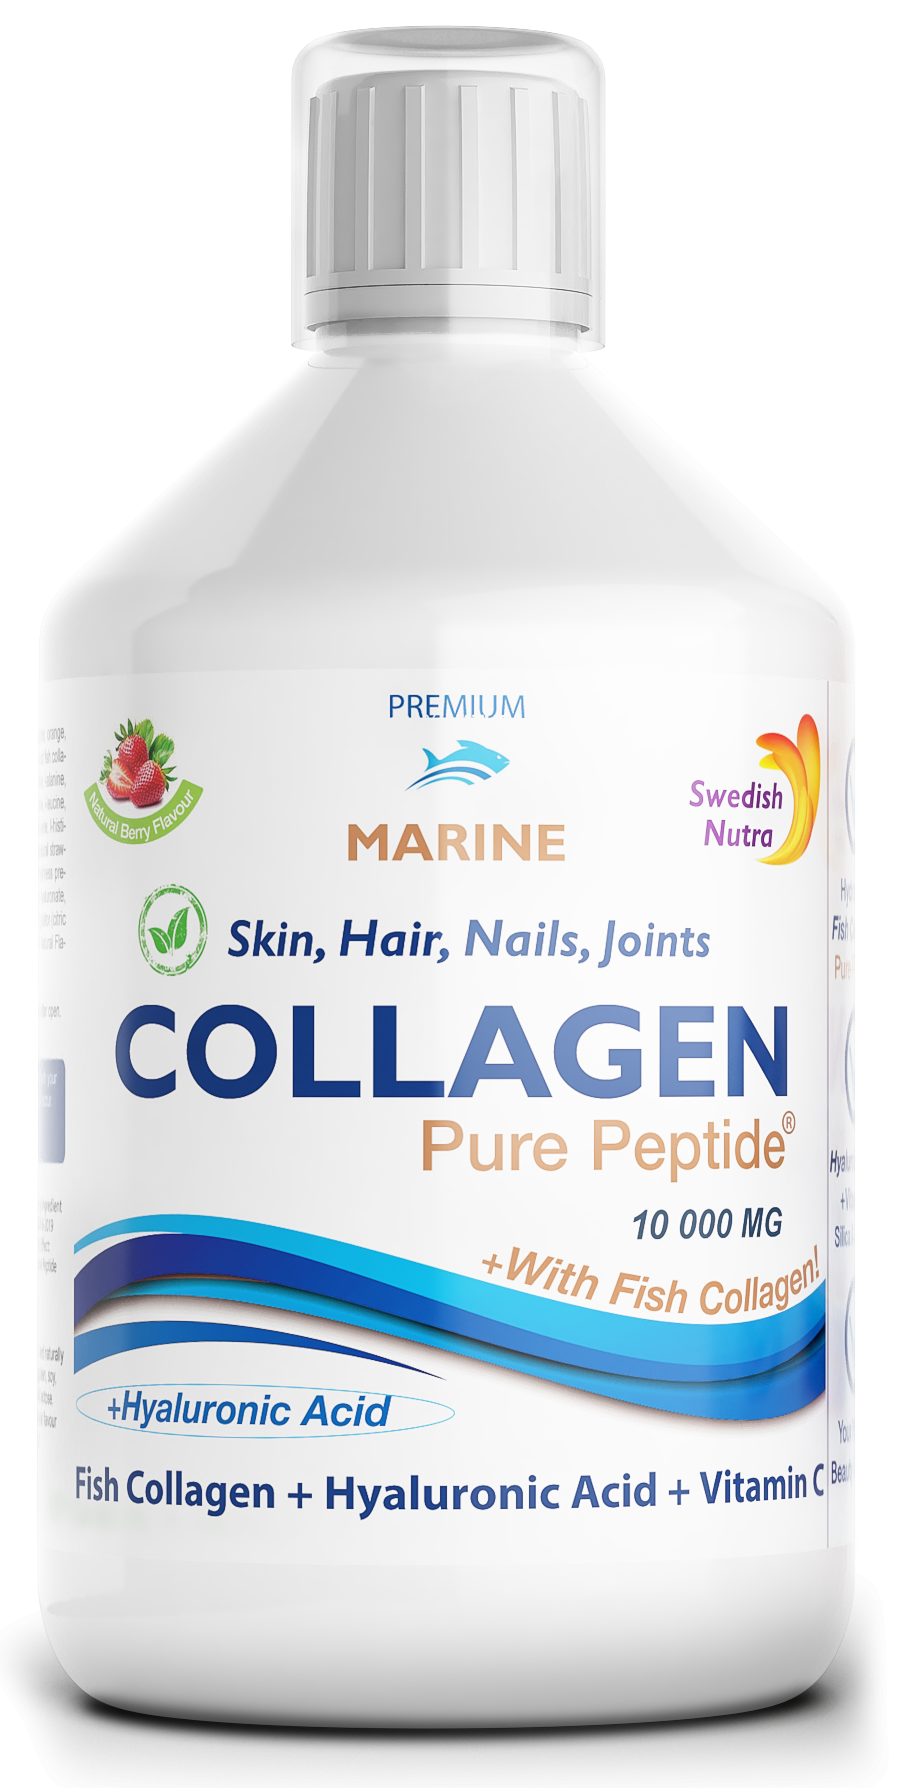 Swedish Nutra Swedish Nutra Collagen 10 000 mg (+With Fish Collagen), 500 мл 